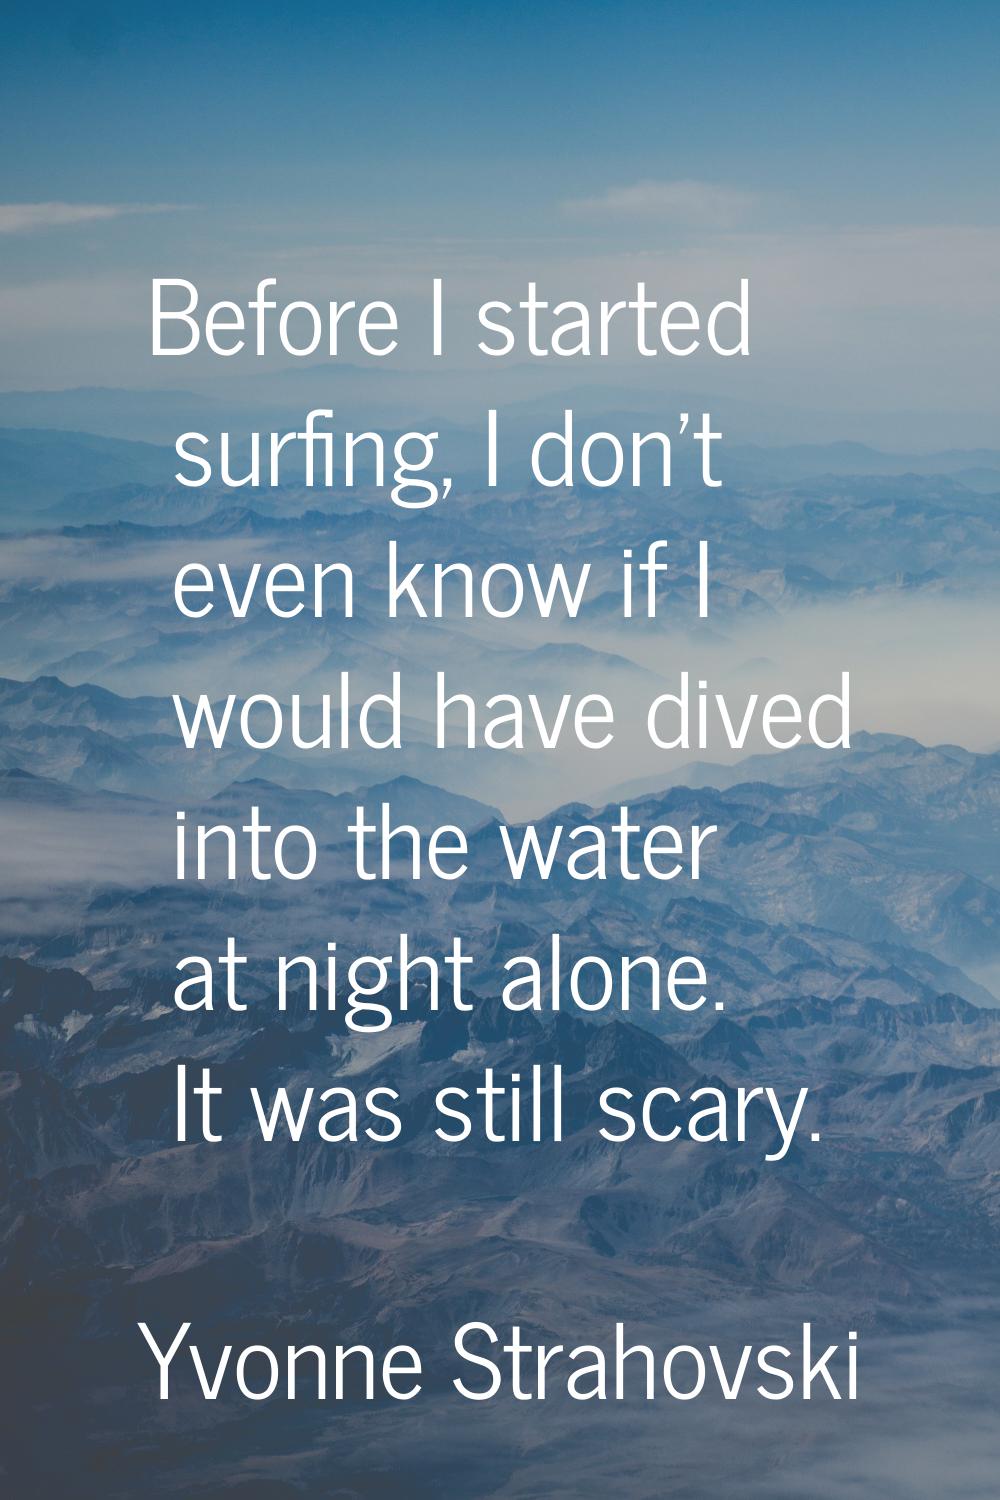 Before I started surfing, I don't even know if I would have dived into the water at night alone. It